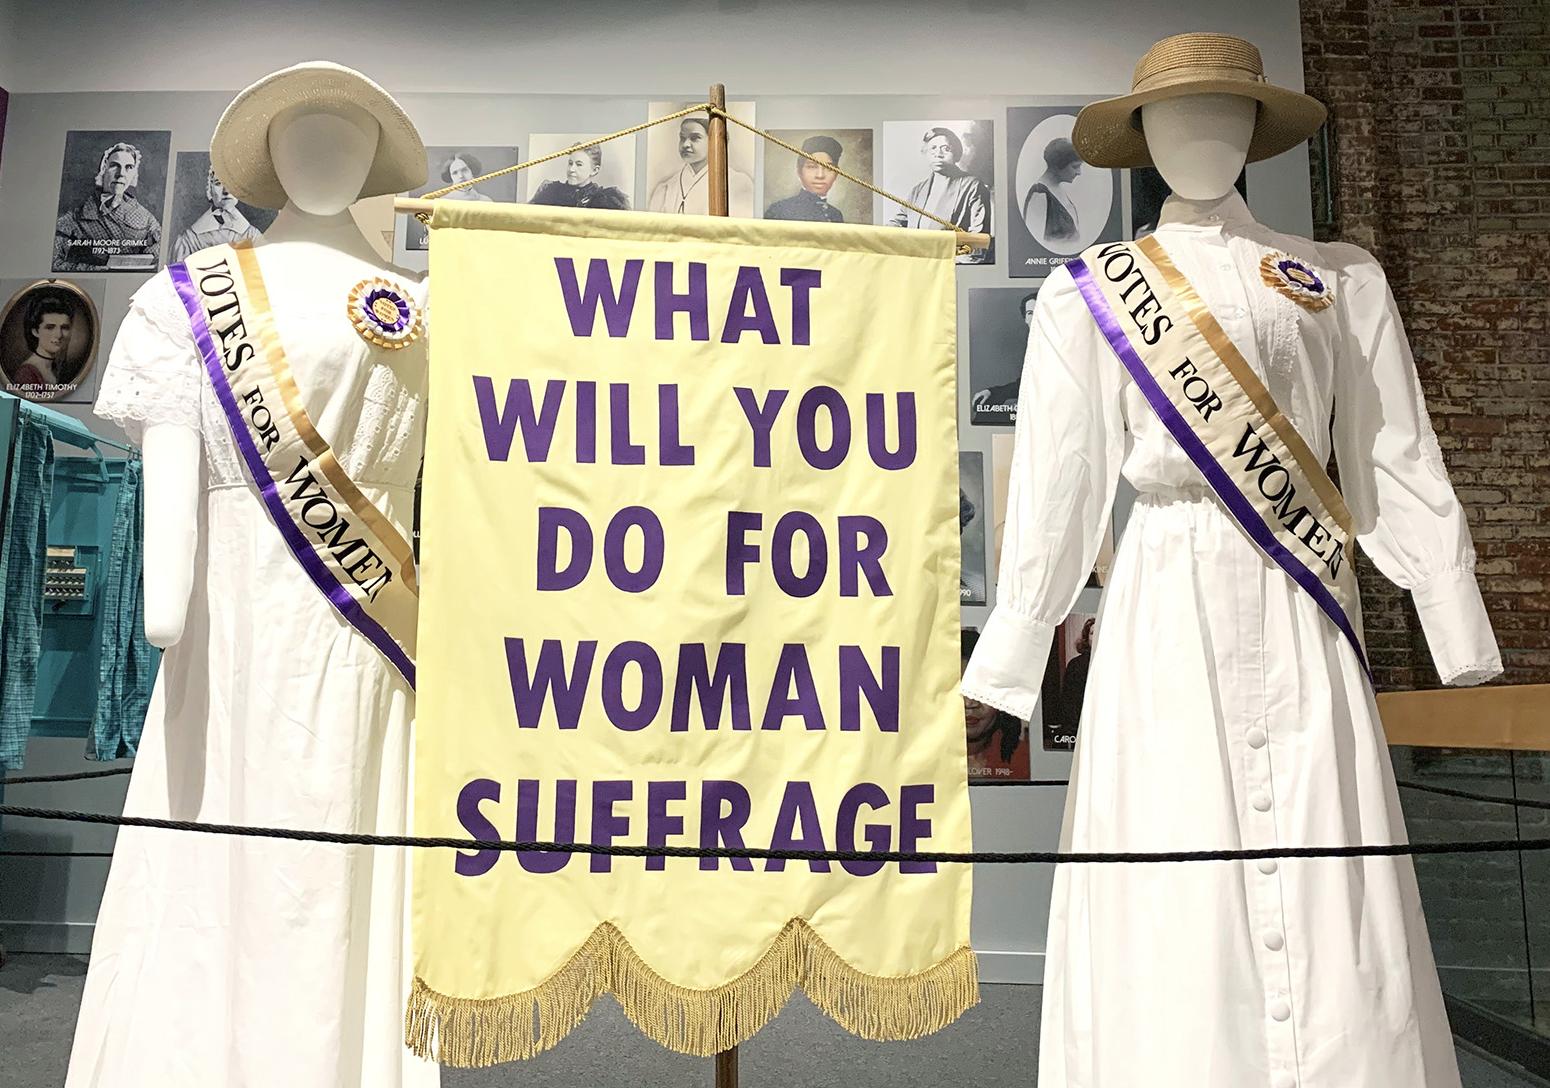 Two mannequins is white ankle length dresses wearing cream and purple trimmed sashes stand on either side of a banner that reads "What Will You Do For Woman Sufferage"